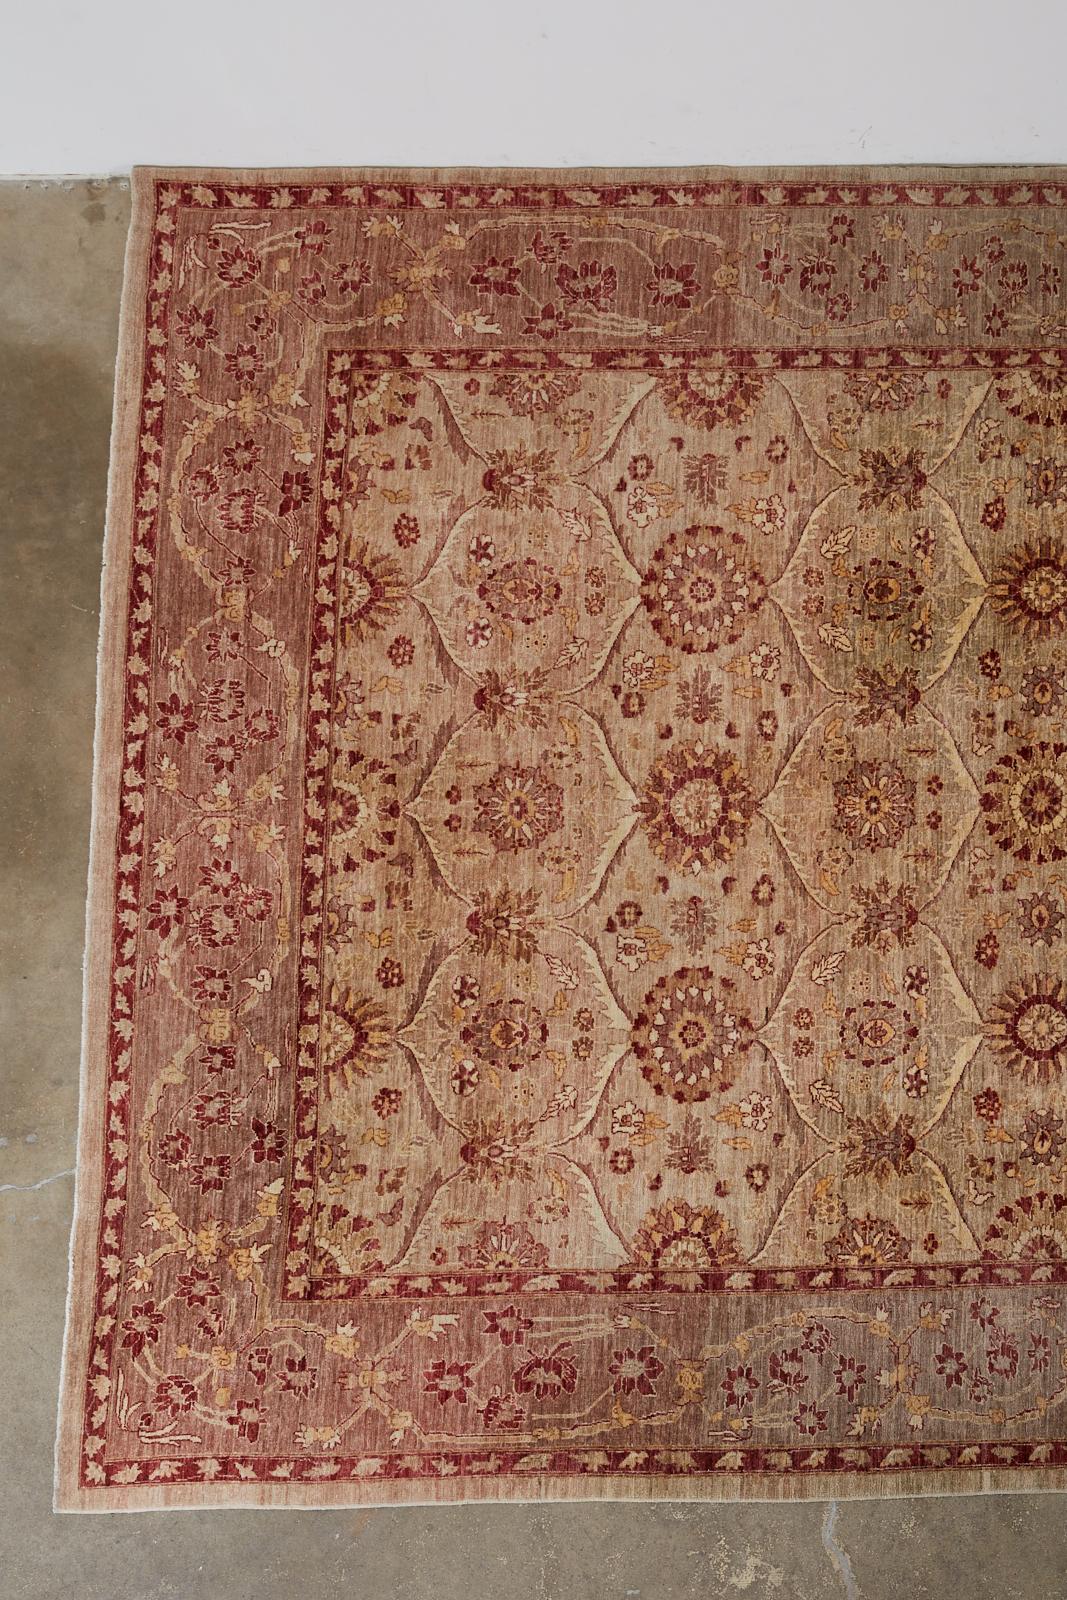 21st Century Turkish Anatolian rug featuring a cranberry color over a beige field. Decorated with stylized flowers made in the Tabriz style from soft handwoven wool. Elegant style with beautiful wear and patina. From an estate in Hollywood, CA.